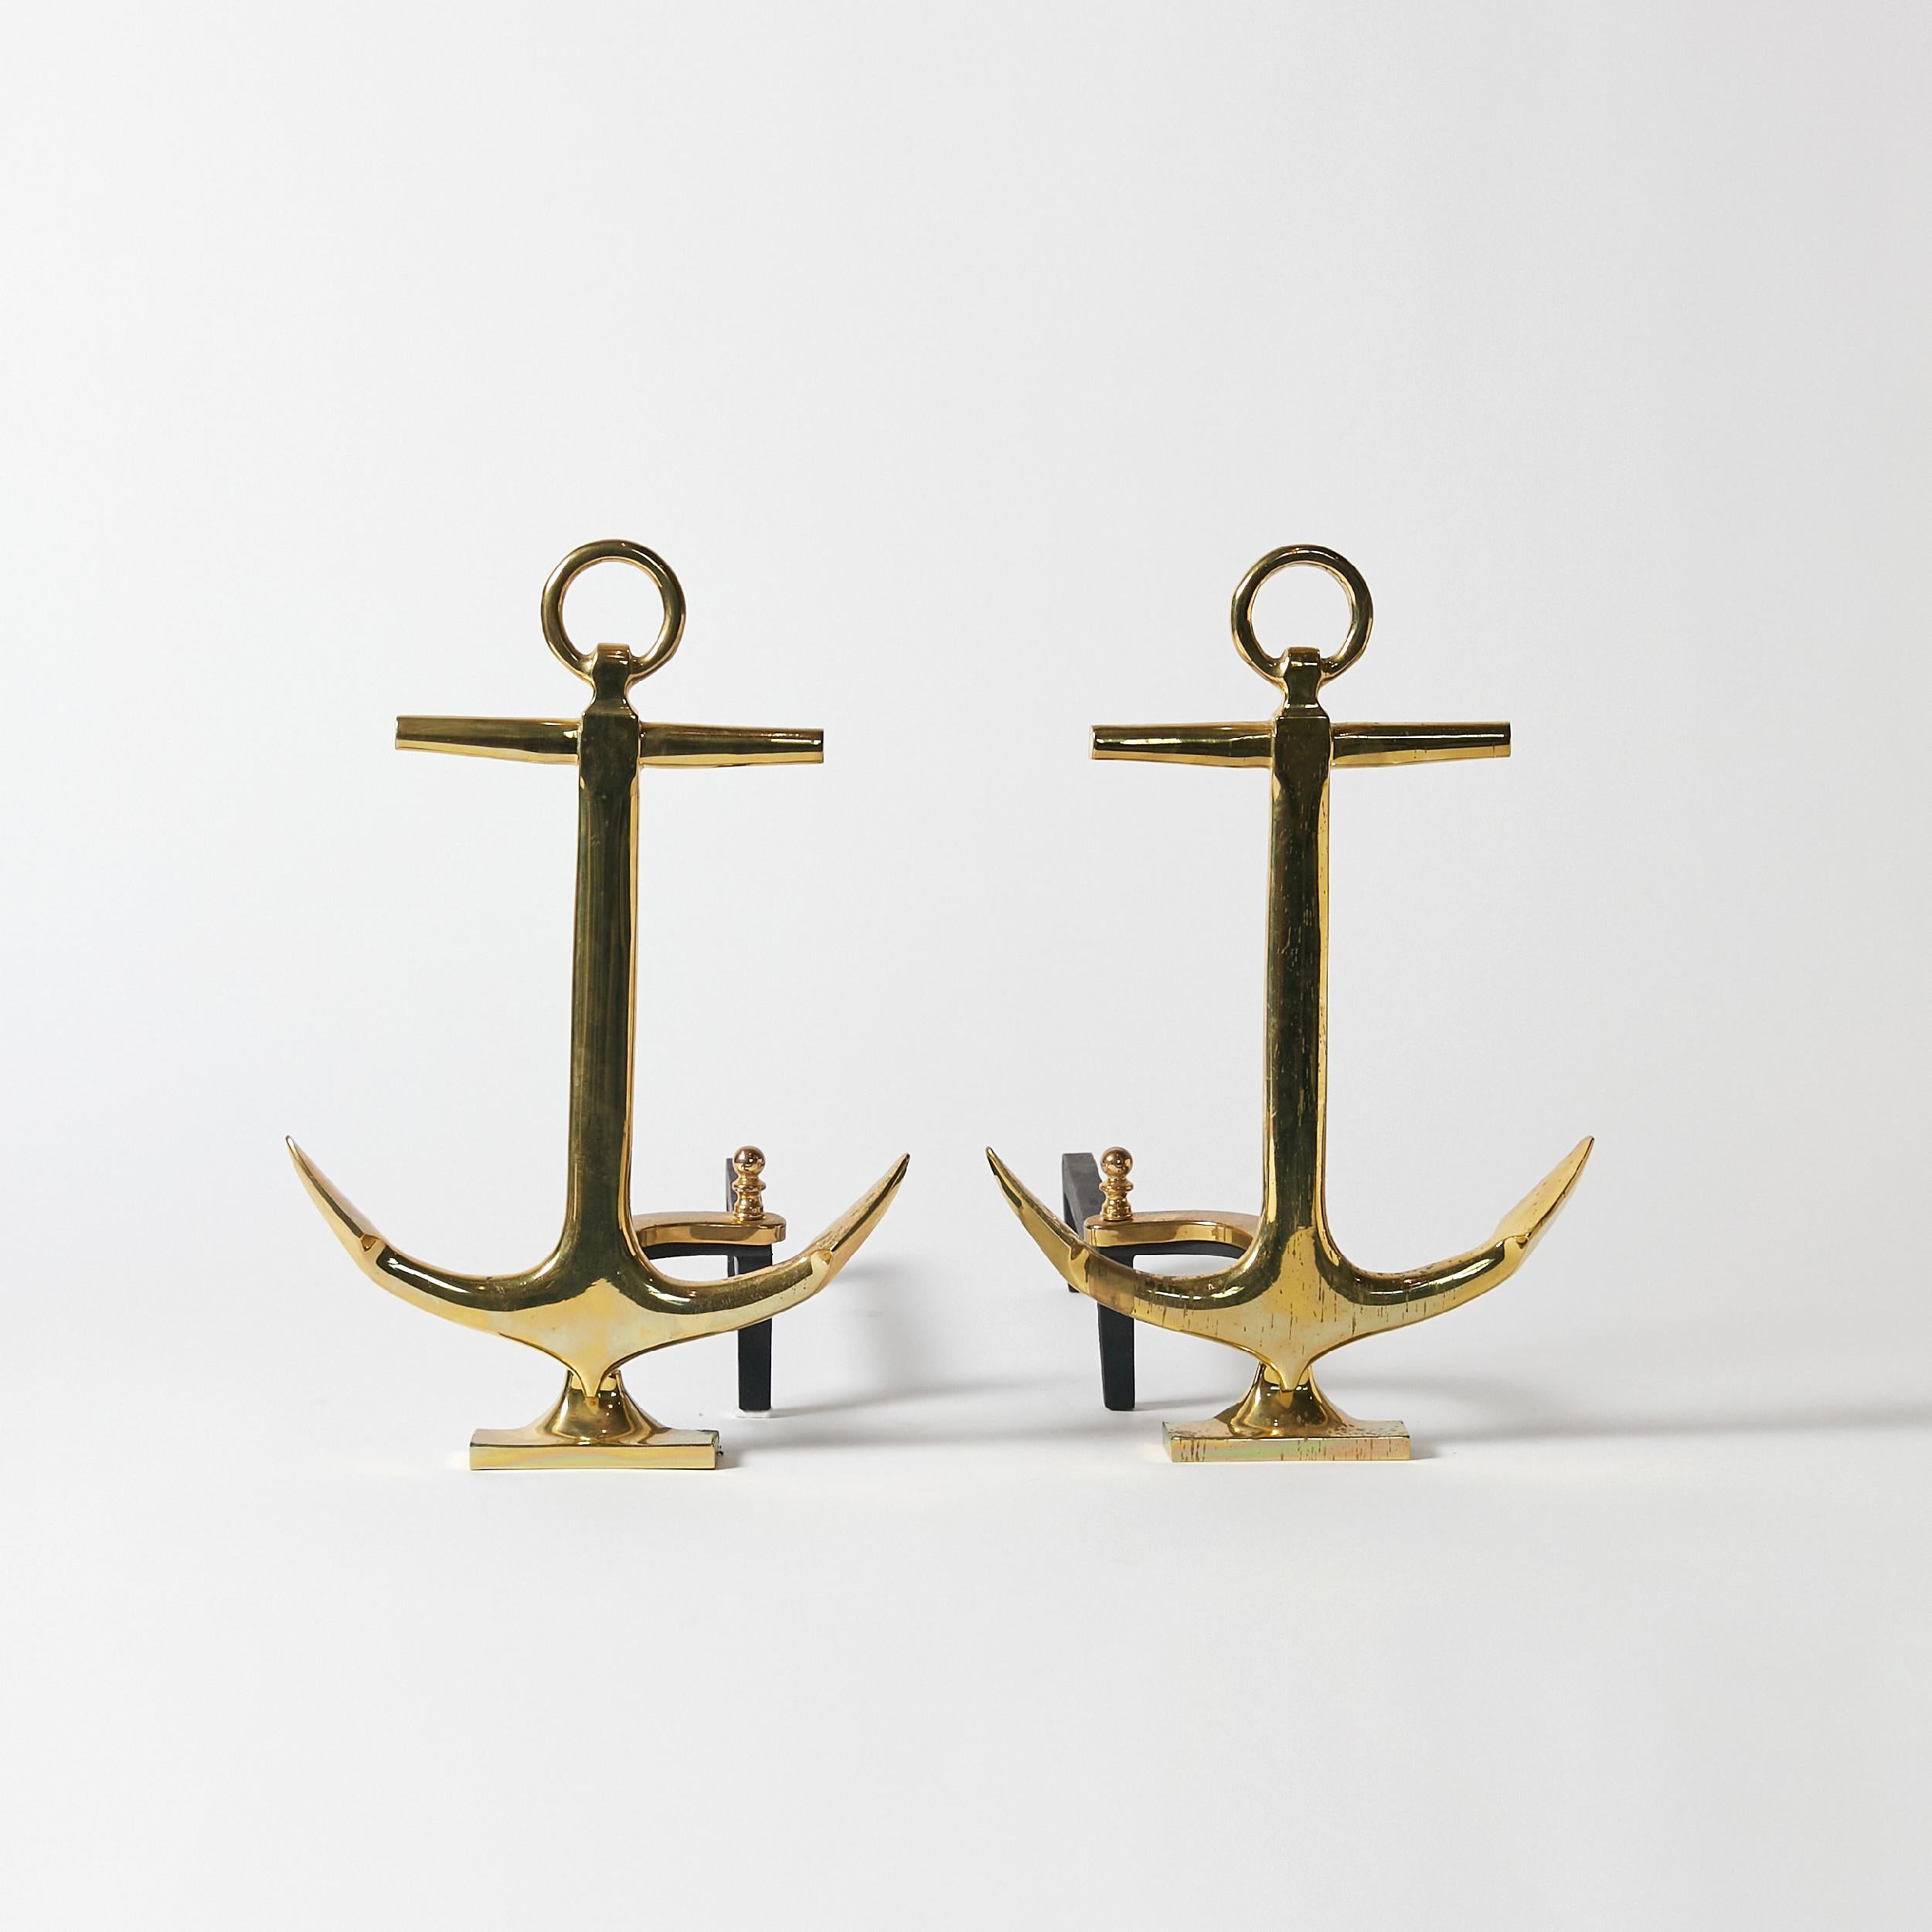 Pair of anchor-shaped andirons in polished brass with black iron stand. Made in USA, circa 1940.